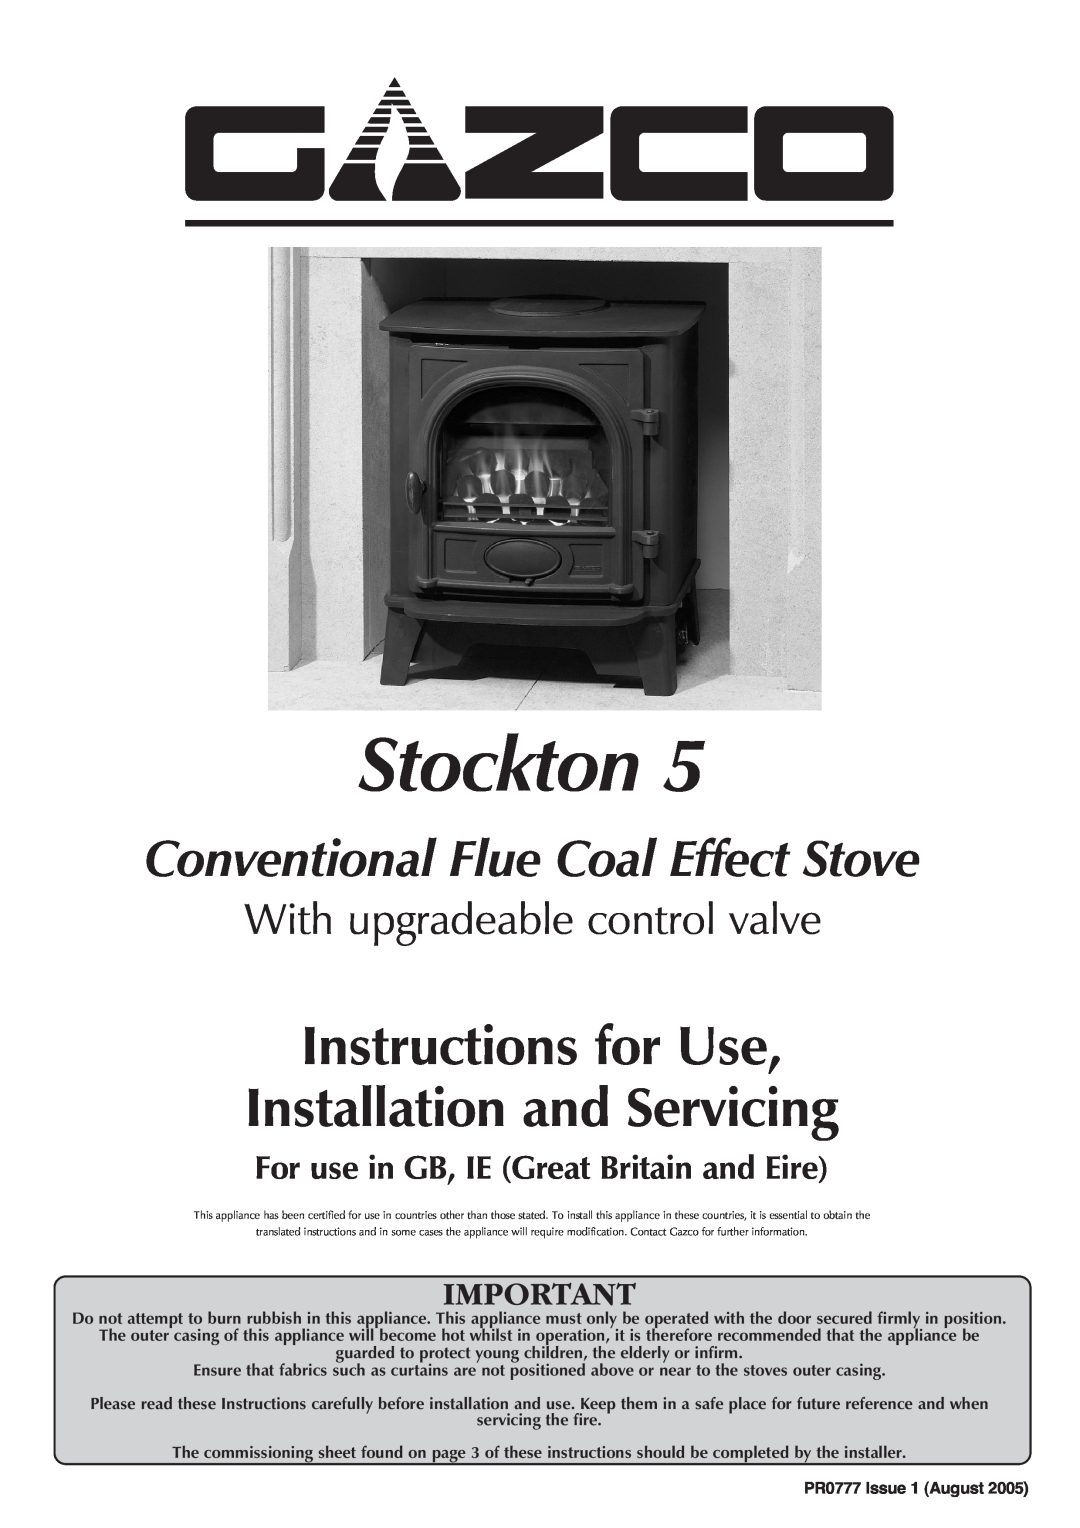 Stovax 5 manual For use in GB, IE Great Britain and Eire, Stockton, Instructions for Use Installation and Servicing 